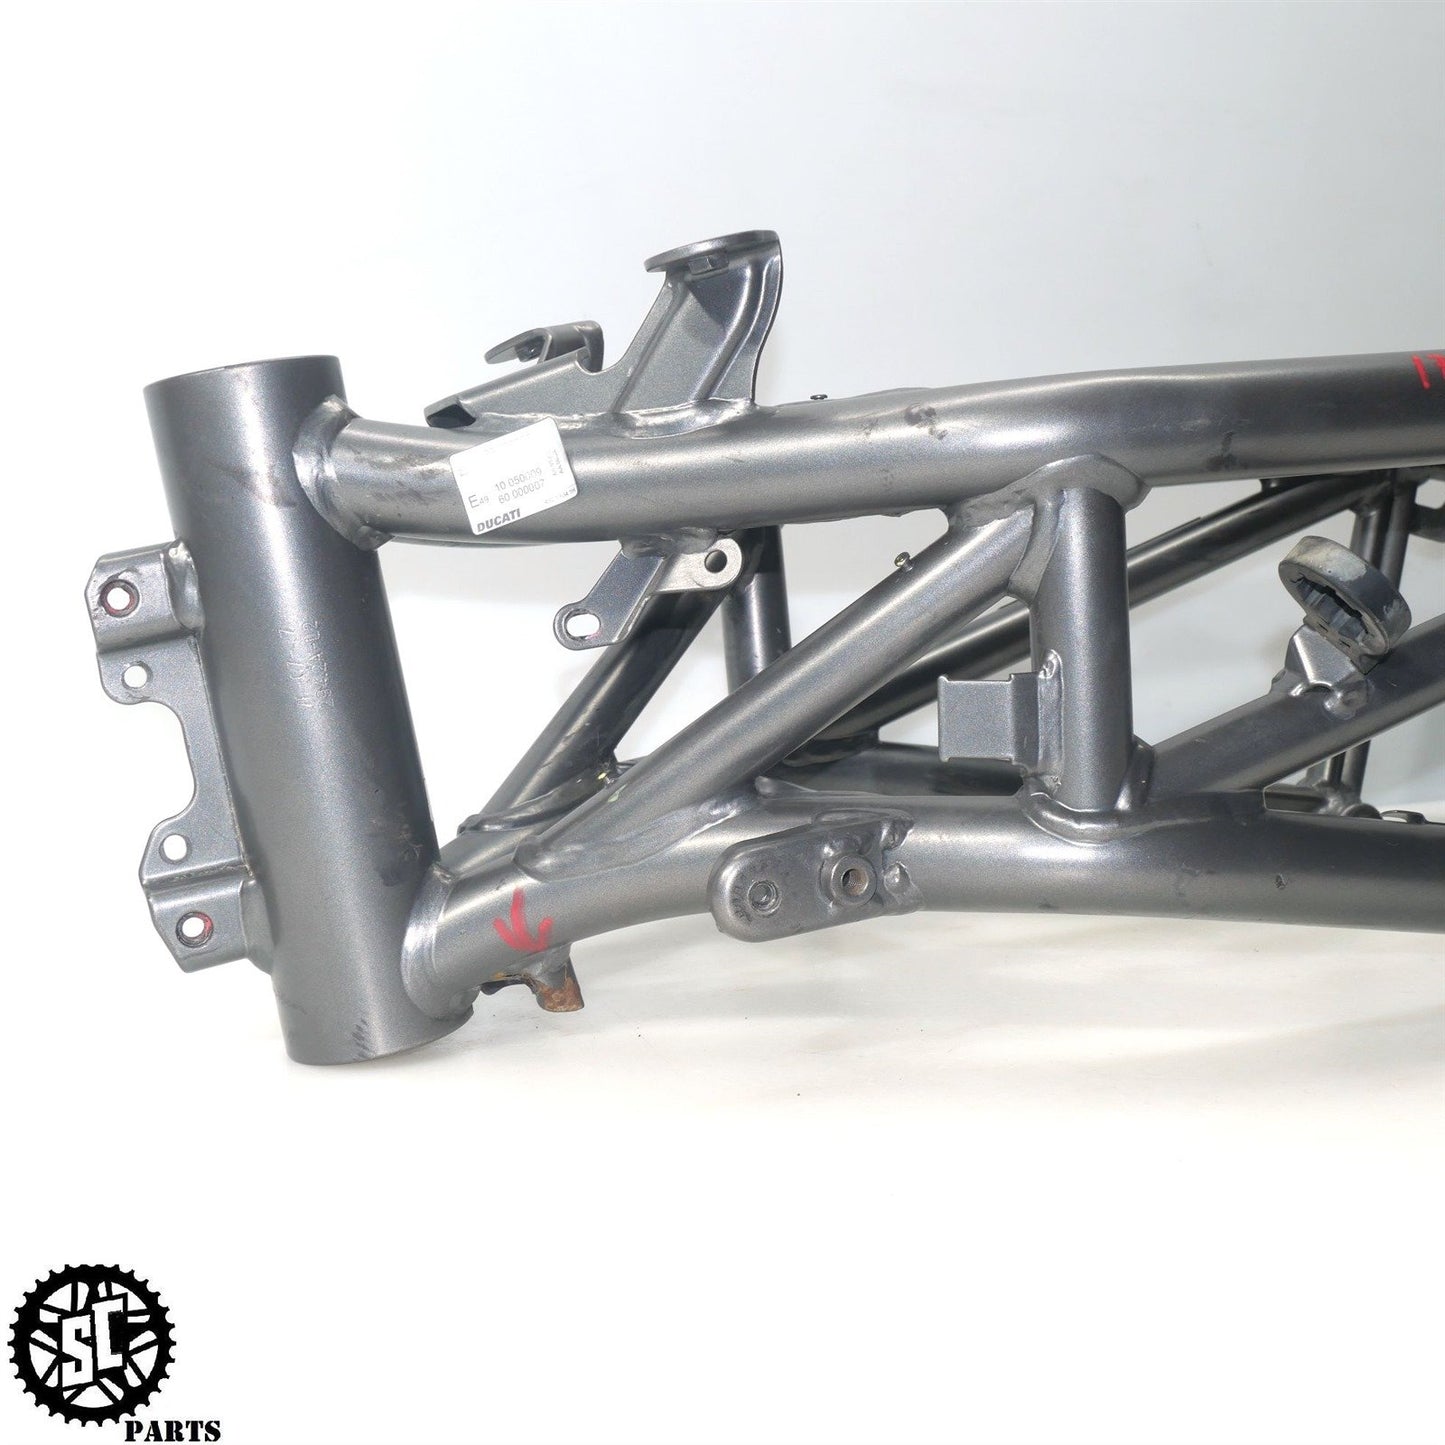 2017-2021 DUCATI MULTISTRADA 950 FRAME CHASSIS *S* D13